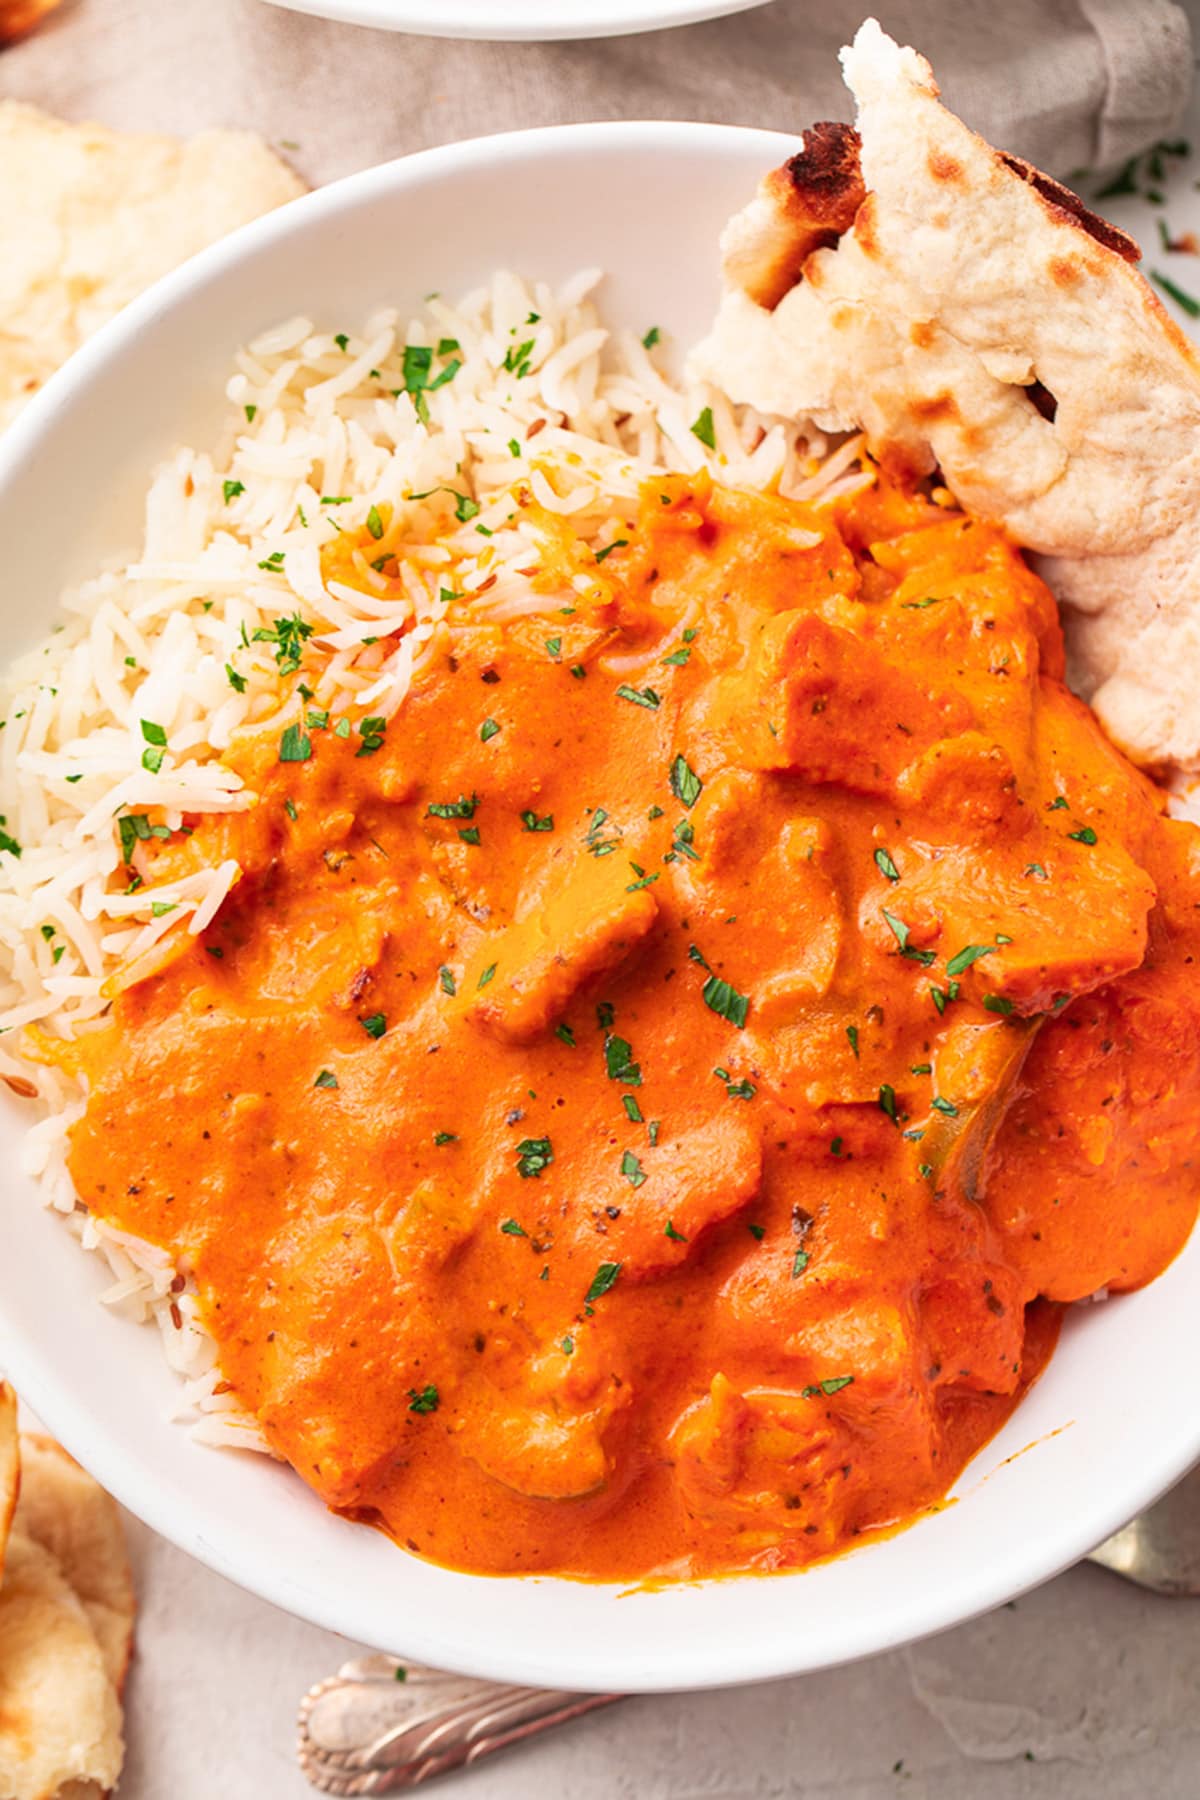 A bowl of chicken tikka masala over basmati rice with a slice of naan.